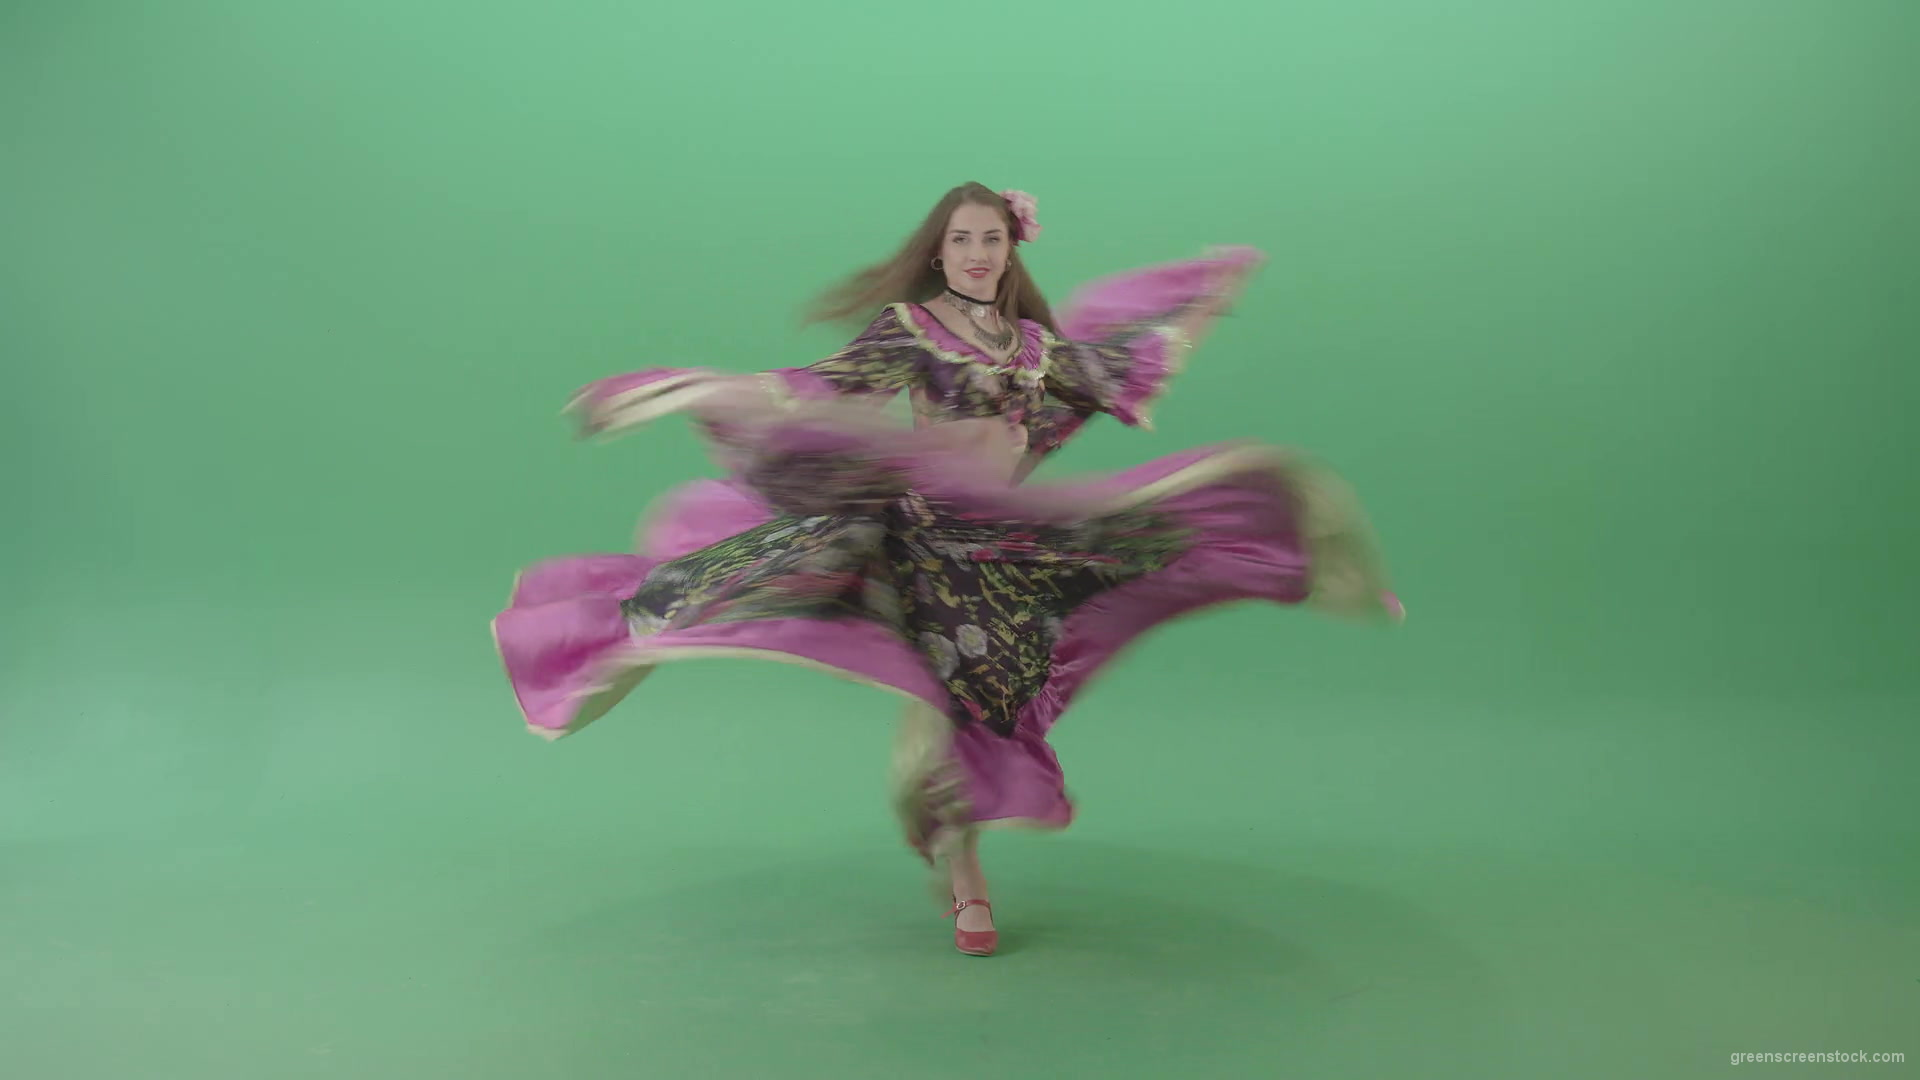 Romatic-moldova-girl-dancing-in-roma-gypsy-dress-isolated-on-green-screen-4K-stock-video-footage-1920_002 Green Screen Stock